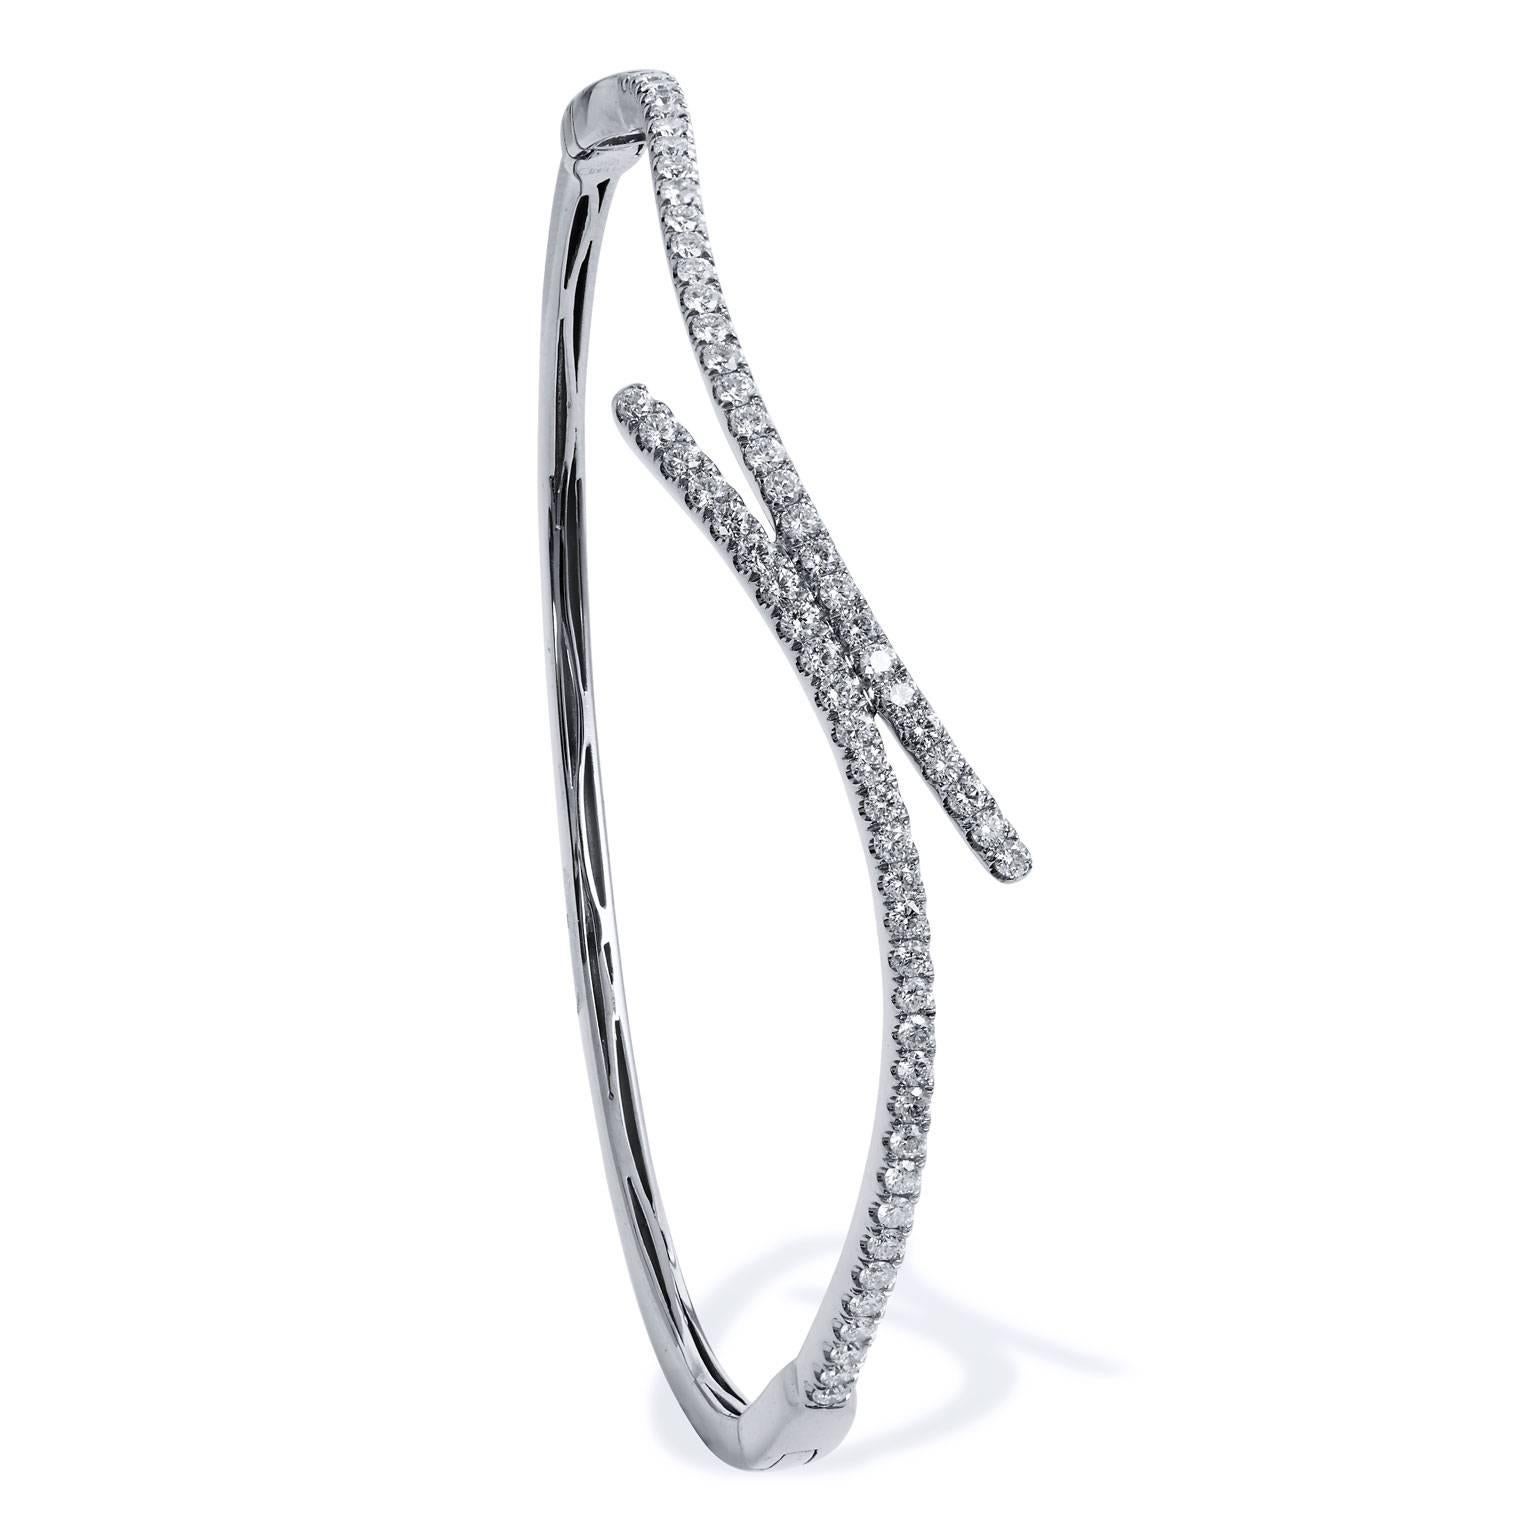 18 karat white gold bends with fluidity in this hinge bracelet featuring 1.13 carat of pave-set diamonds.